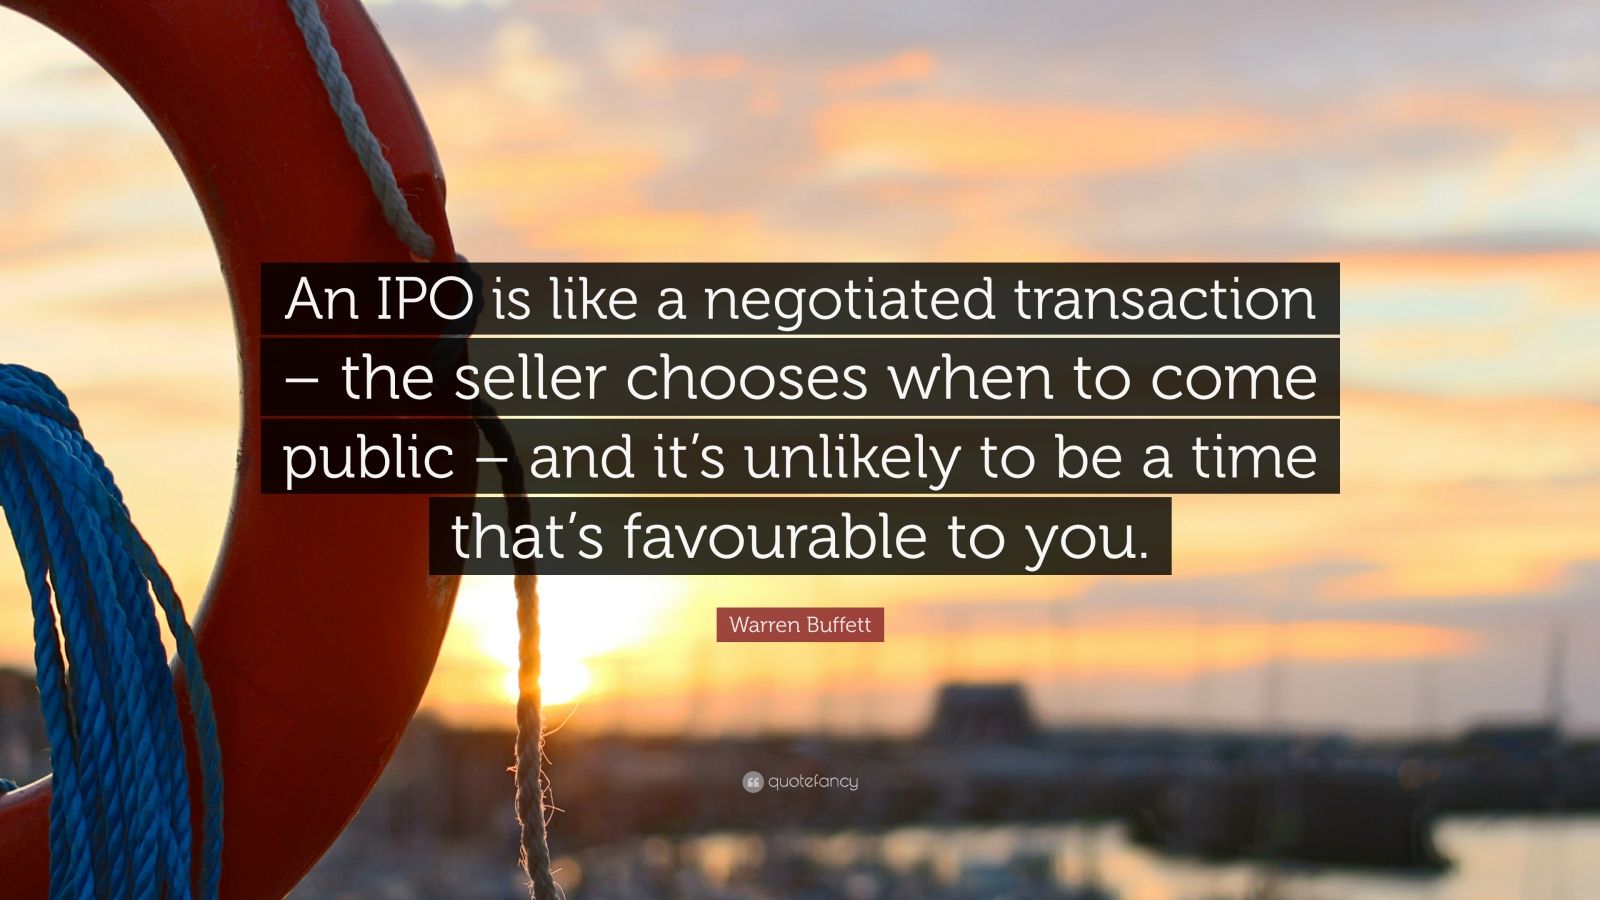 2942031 Warren Buffett Quote An IPO is like a negotiated transaction the